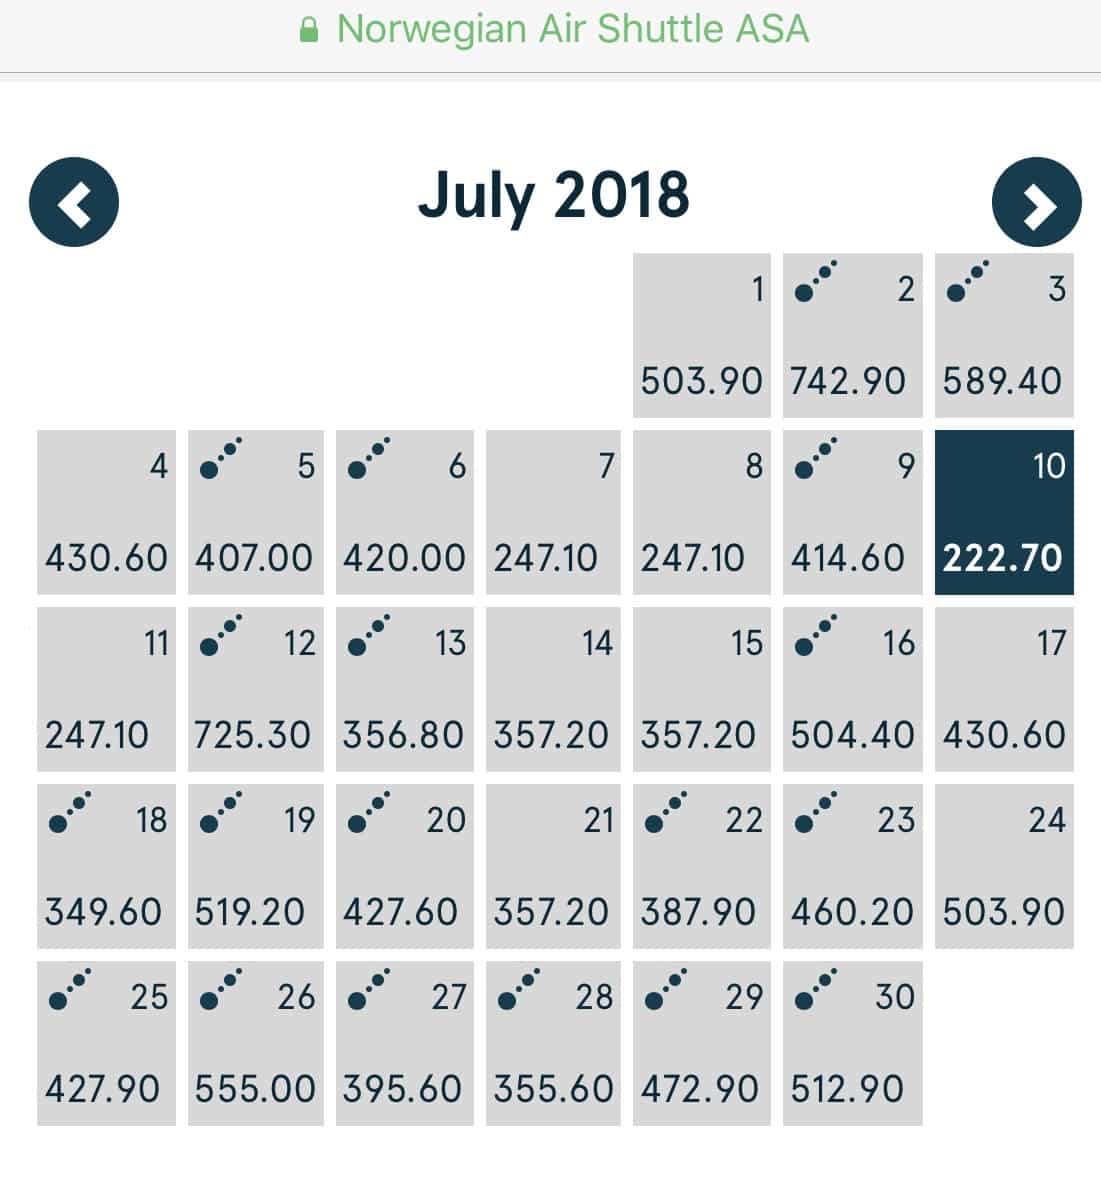 How much you need to spend to fly to new York for a week